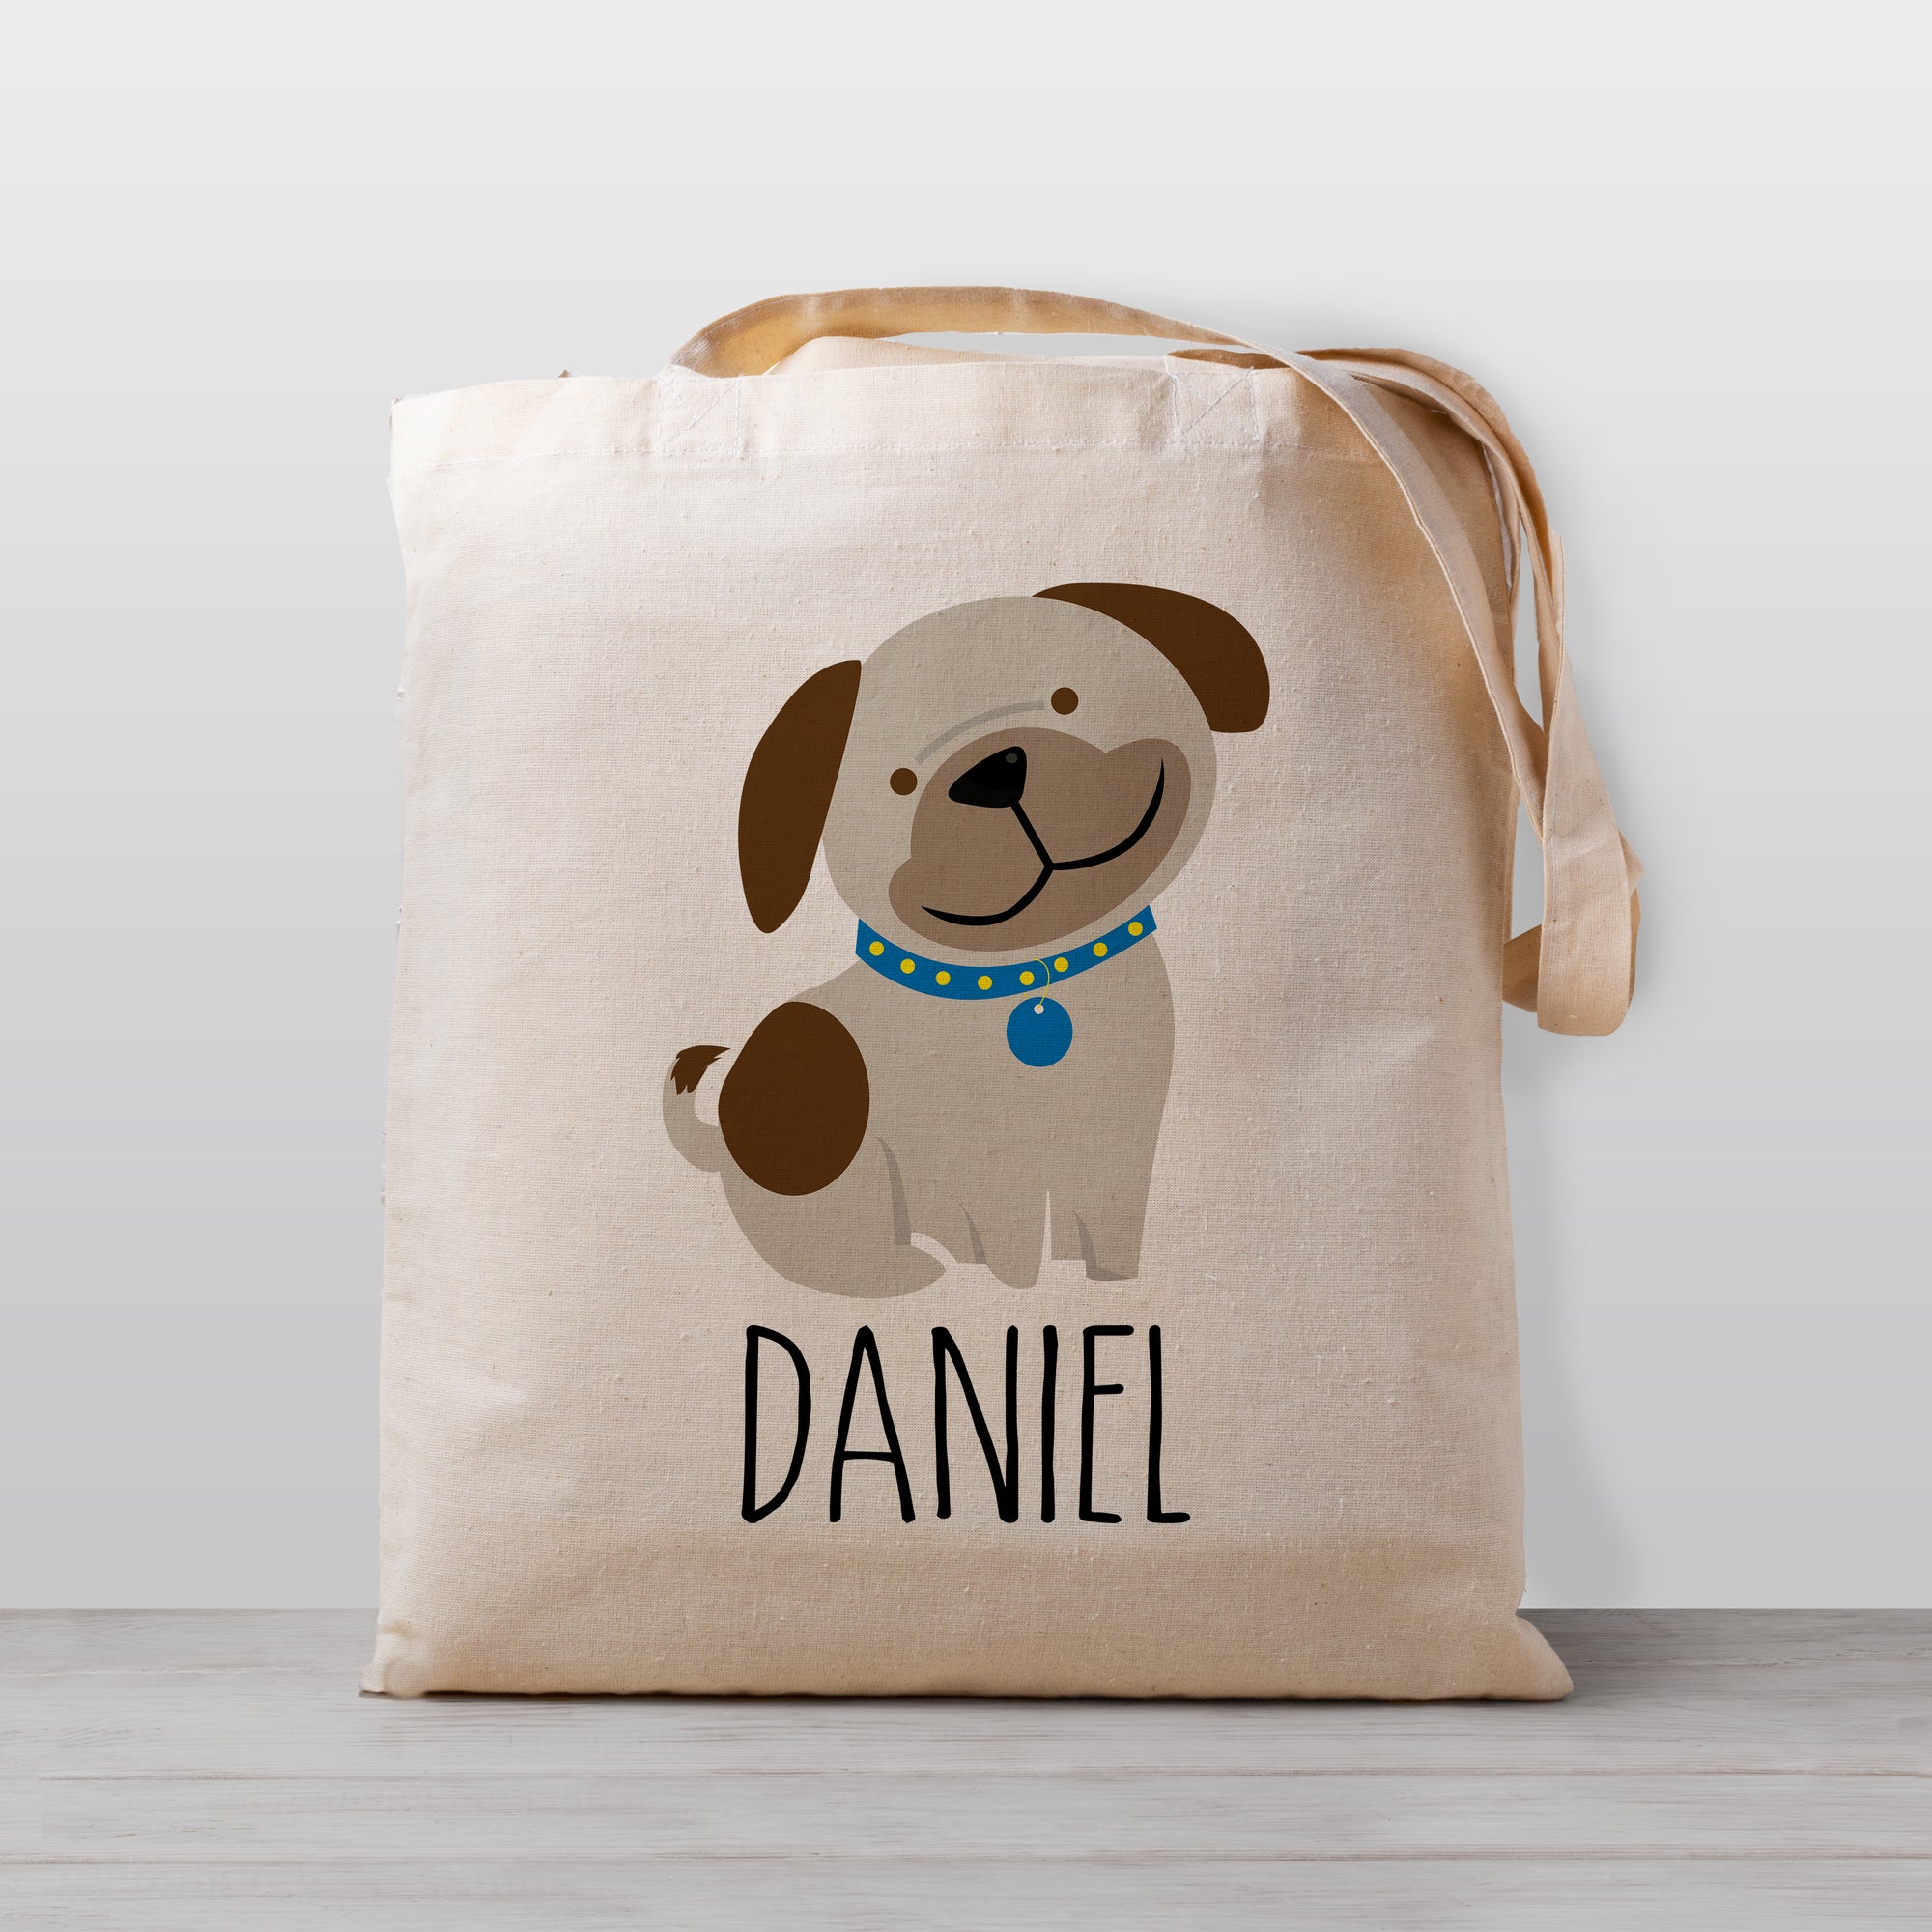 Puppy Dog Personalized Tote Bag, daycare preschool kindergarten, library book bag, sleepover bag, 100% natural cotton canvas